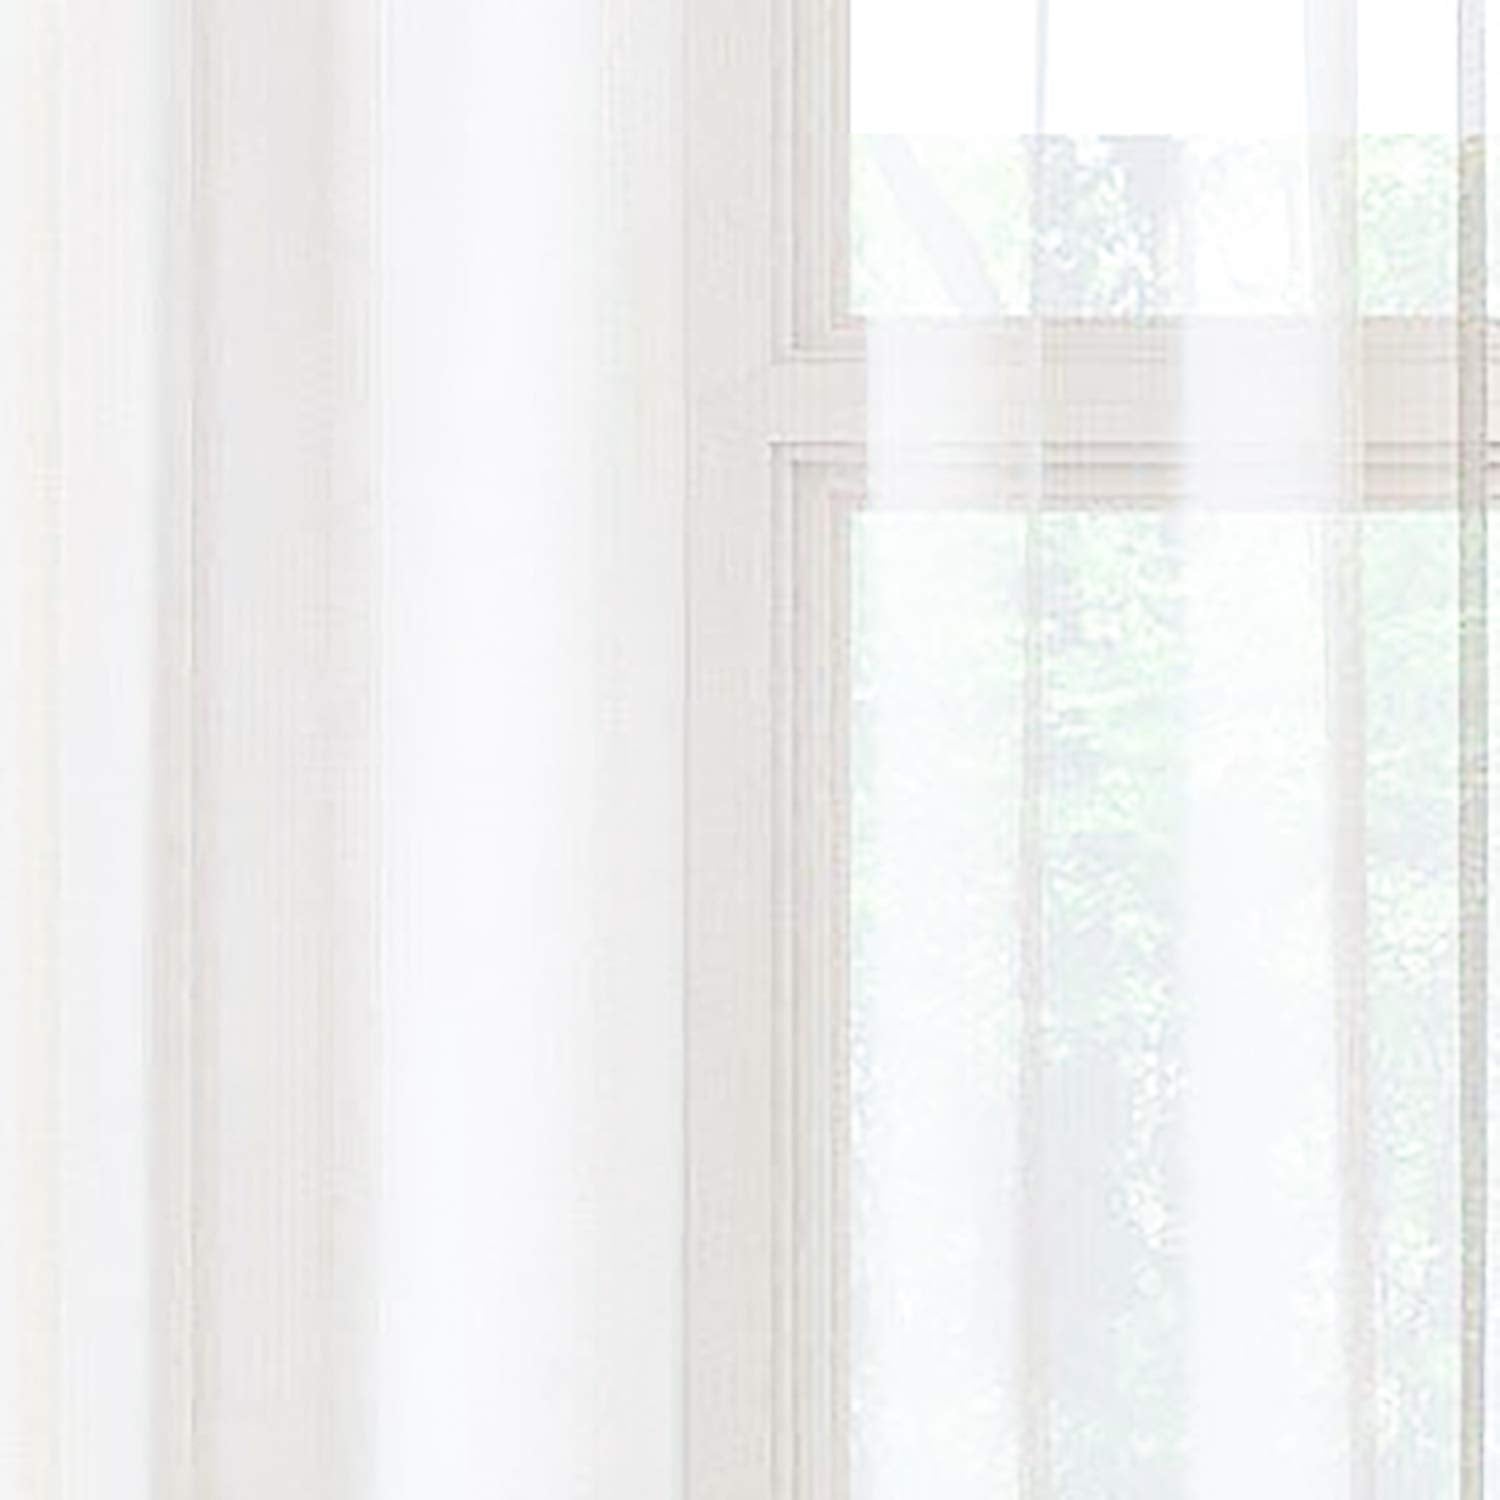 Encasa Homes Sheer Net Curtains Semi Transparent 5 ft for Window Curtains, Rod Pocket, Curtains for Bedroom, Living Room (107x152 cm), Milky White, Set of 2